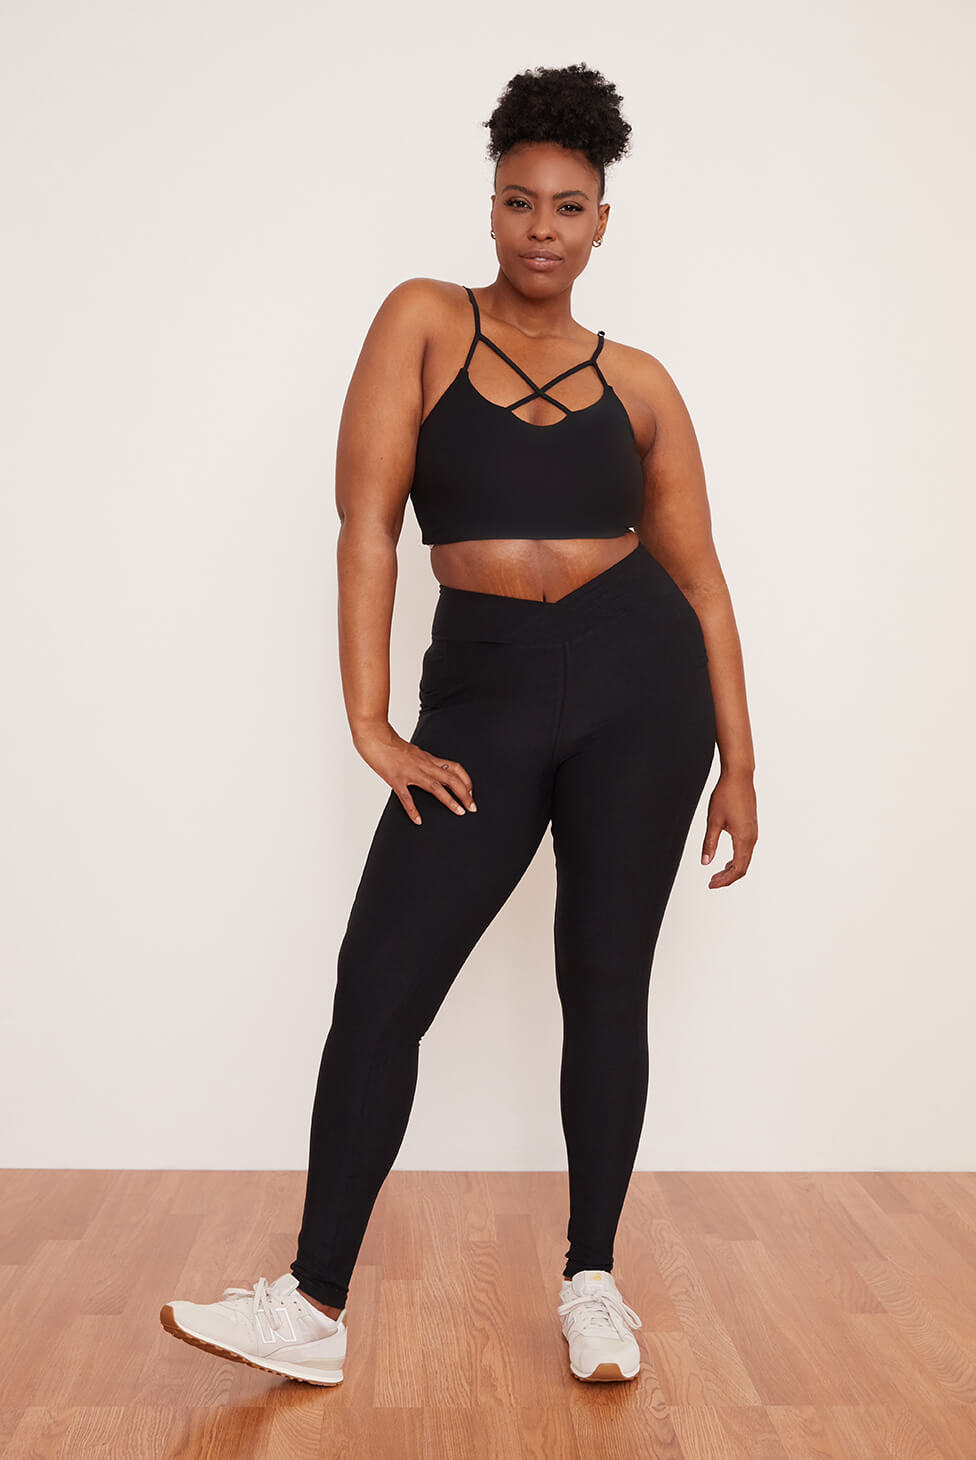 The Sports Legging - Sueded Onyx